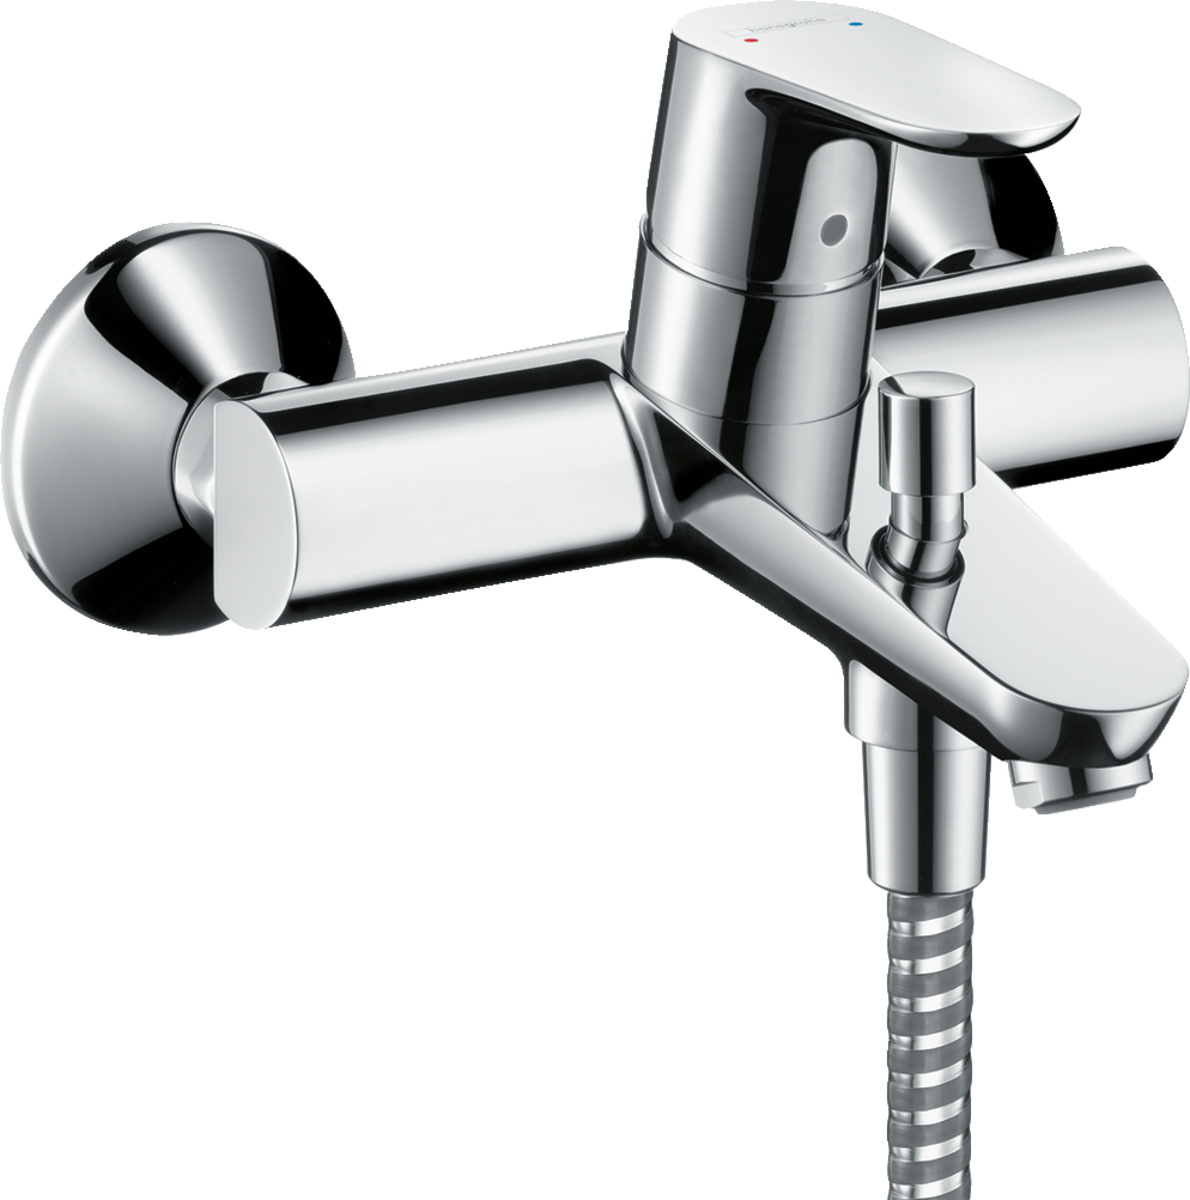 Picture of HANSGROHE Focus Single lever bath mixer for exposed installation #31940000 - Chrome